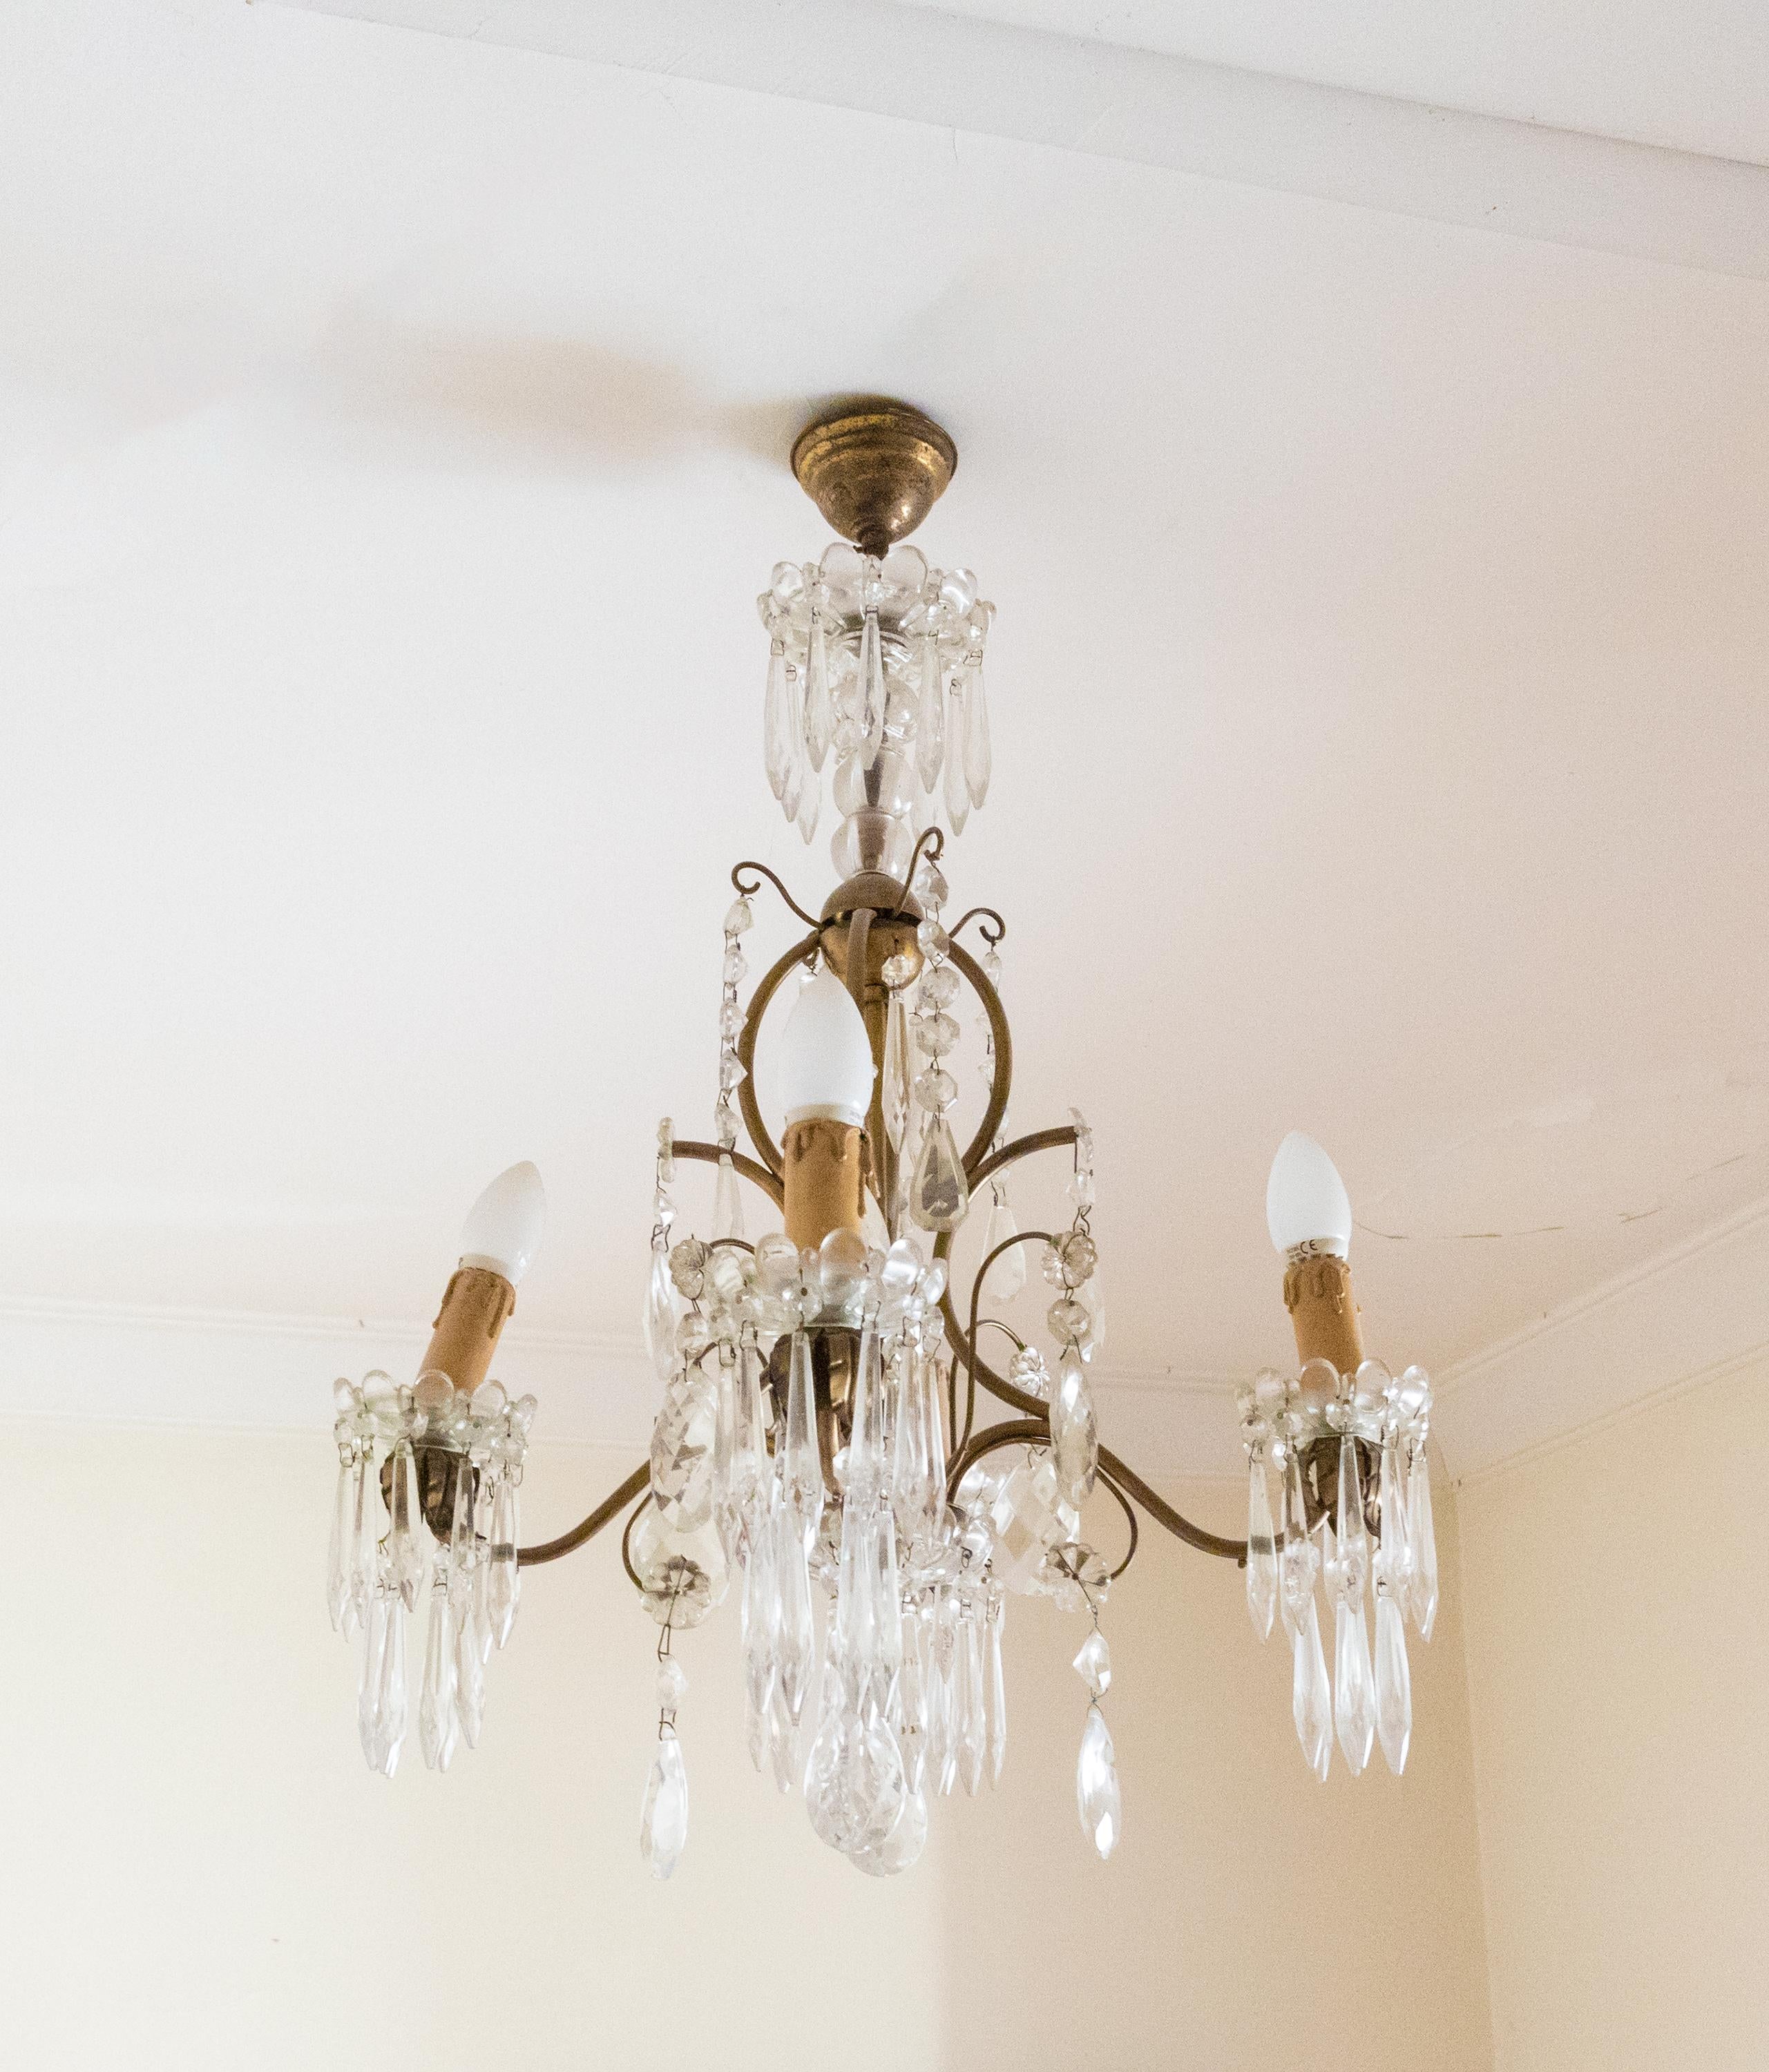 A 19th century crystal small chandelier, four arms and four candles,  in the style of Louis XV.
Fully rewired and gilted 

Height 67 cm
Diameter 46 cm 

The chandelier is currently wired for both European Union and US standards LED lights. The LED